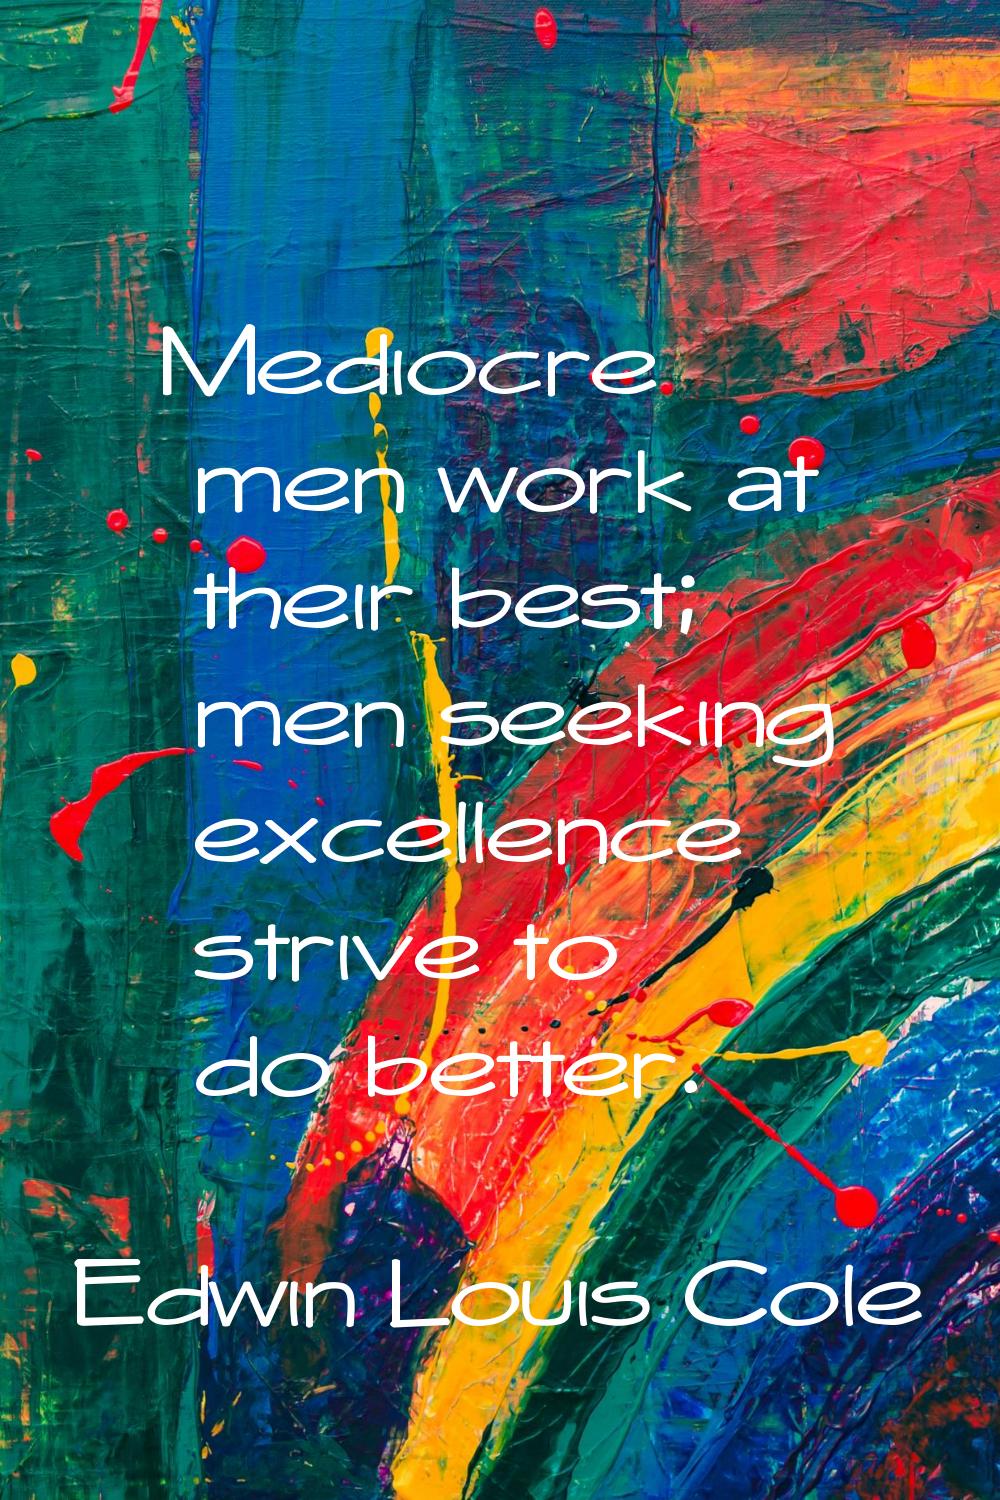 Mediocre men work at their best; men seeking excellence strive to do better.